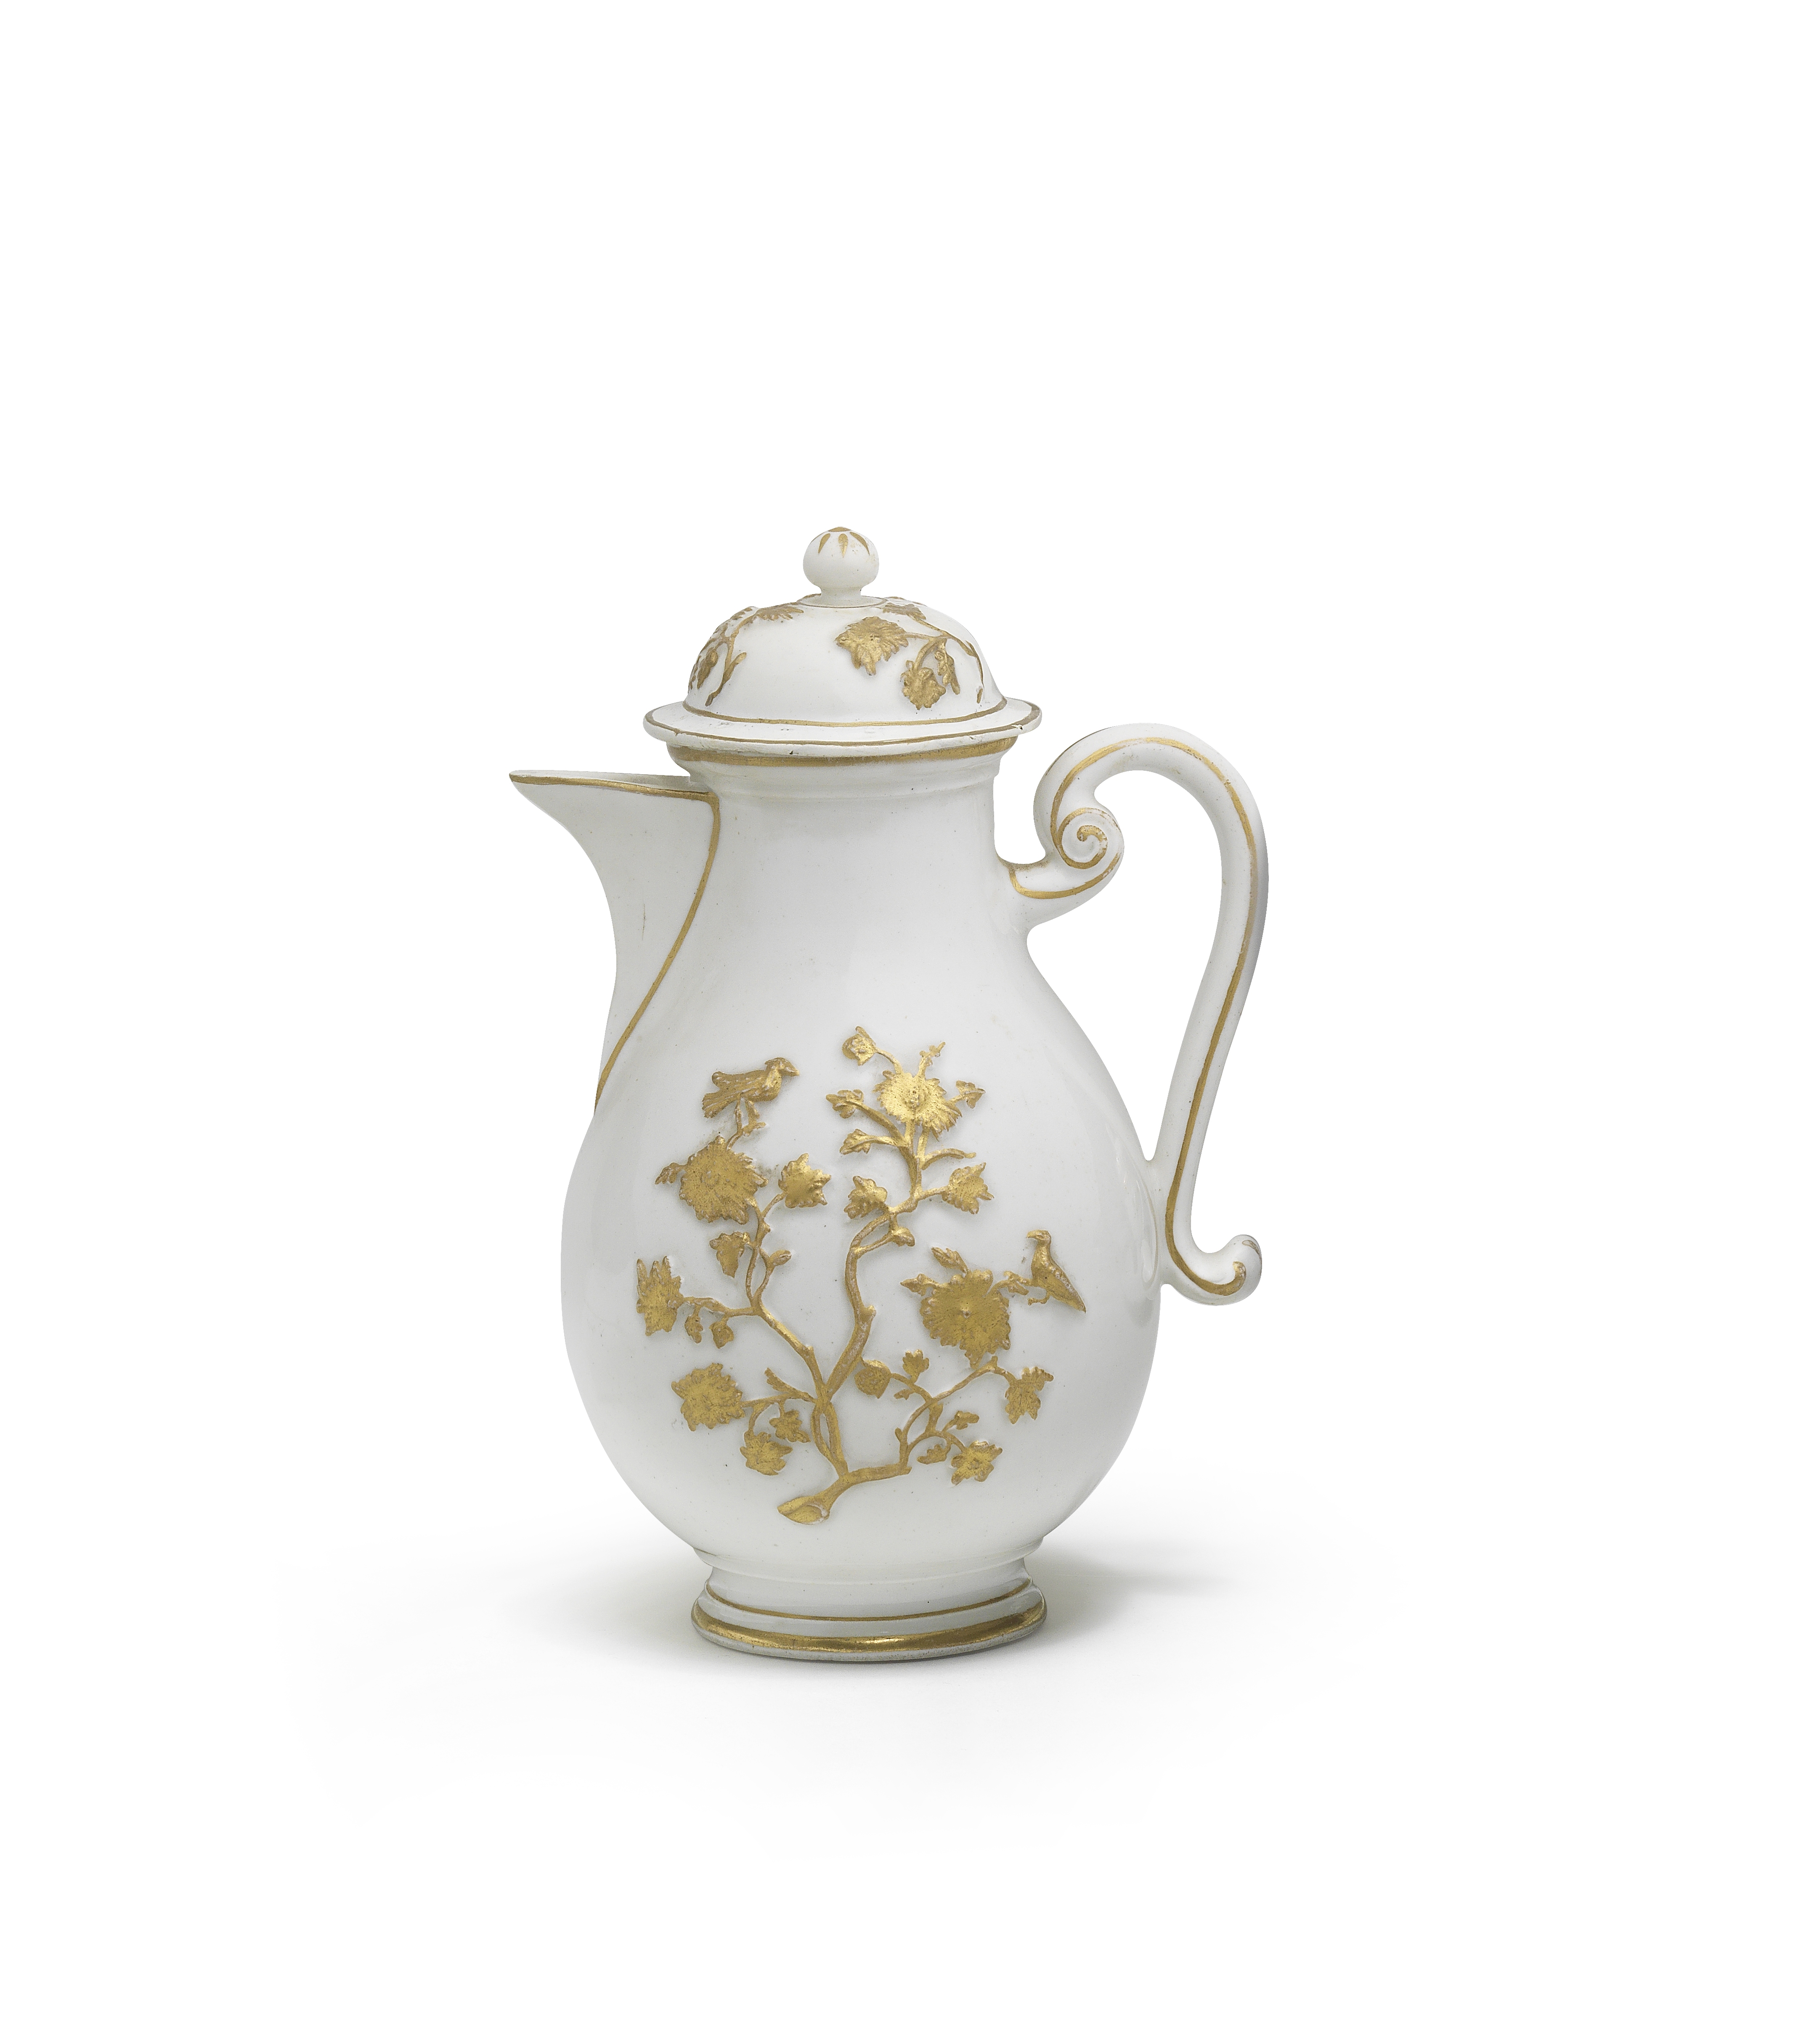 A Meissen coffee pot and cover, circa 1725-30